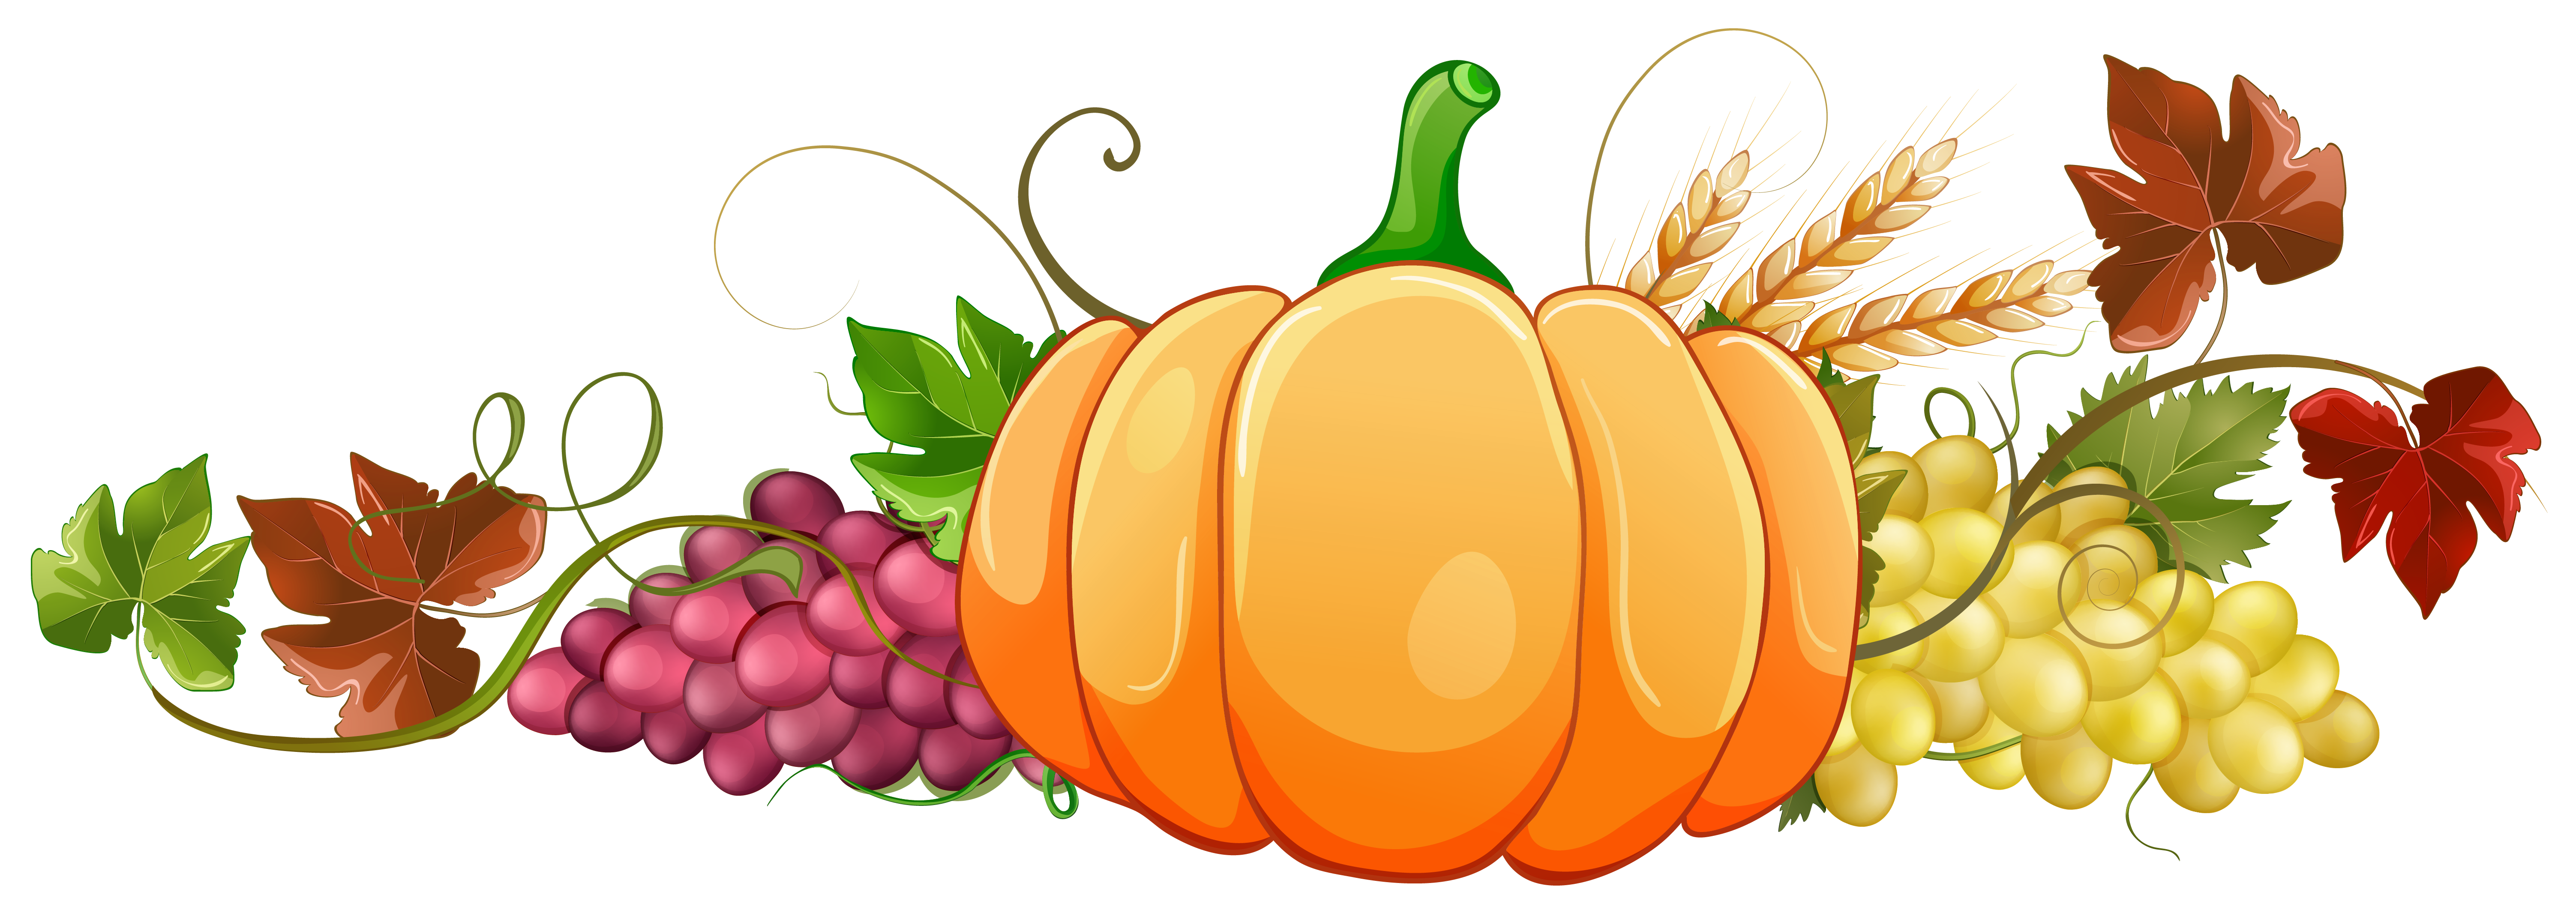 fall decorations clipart - photo #11